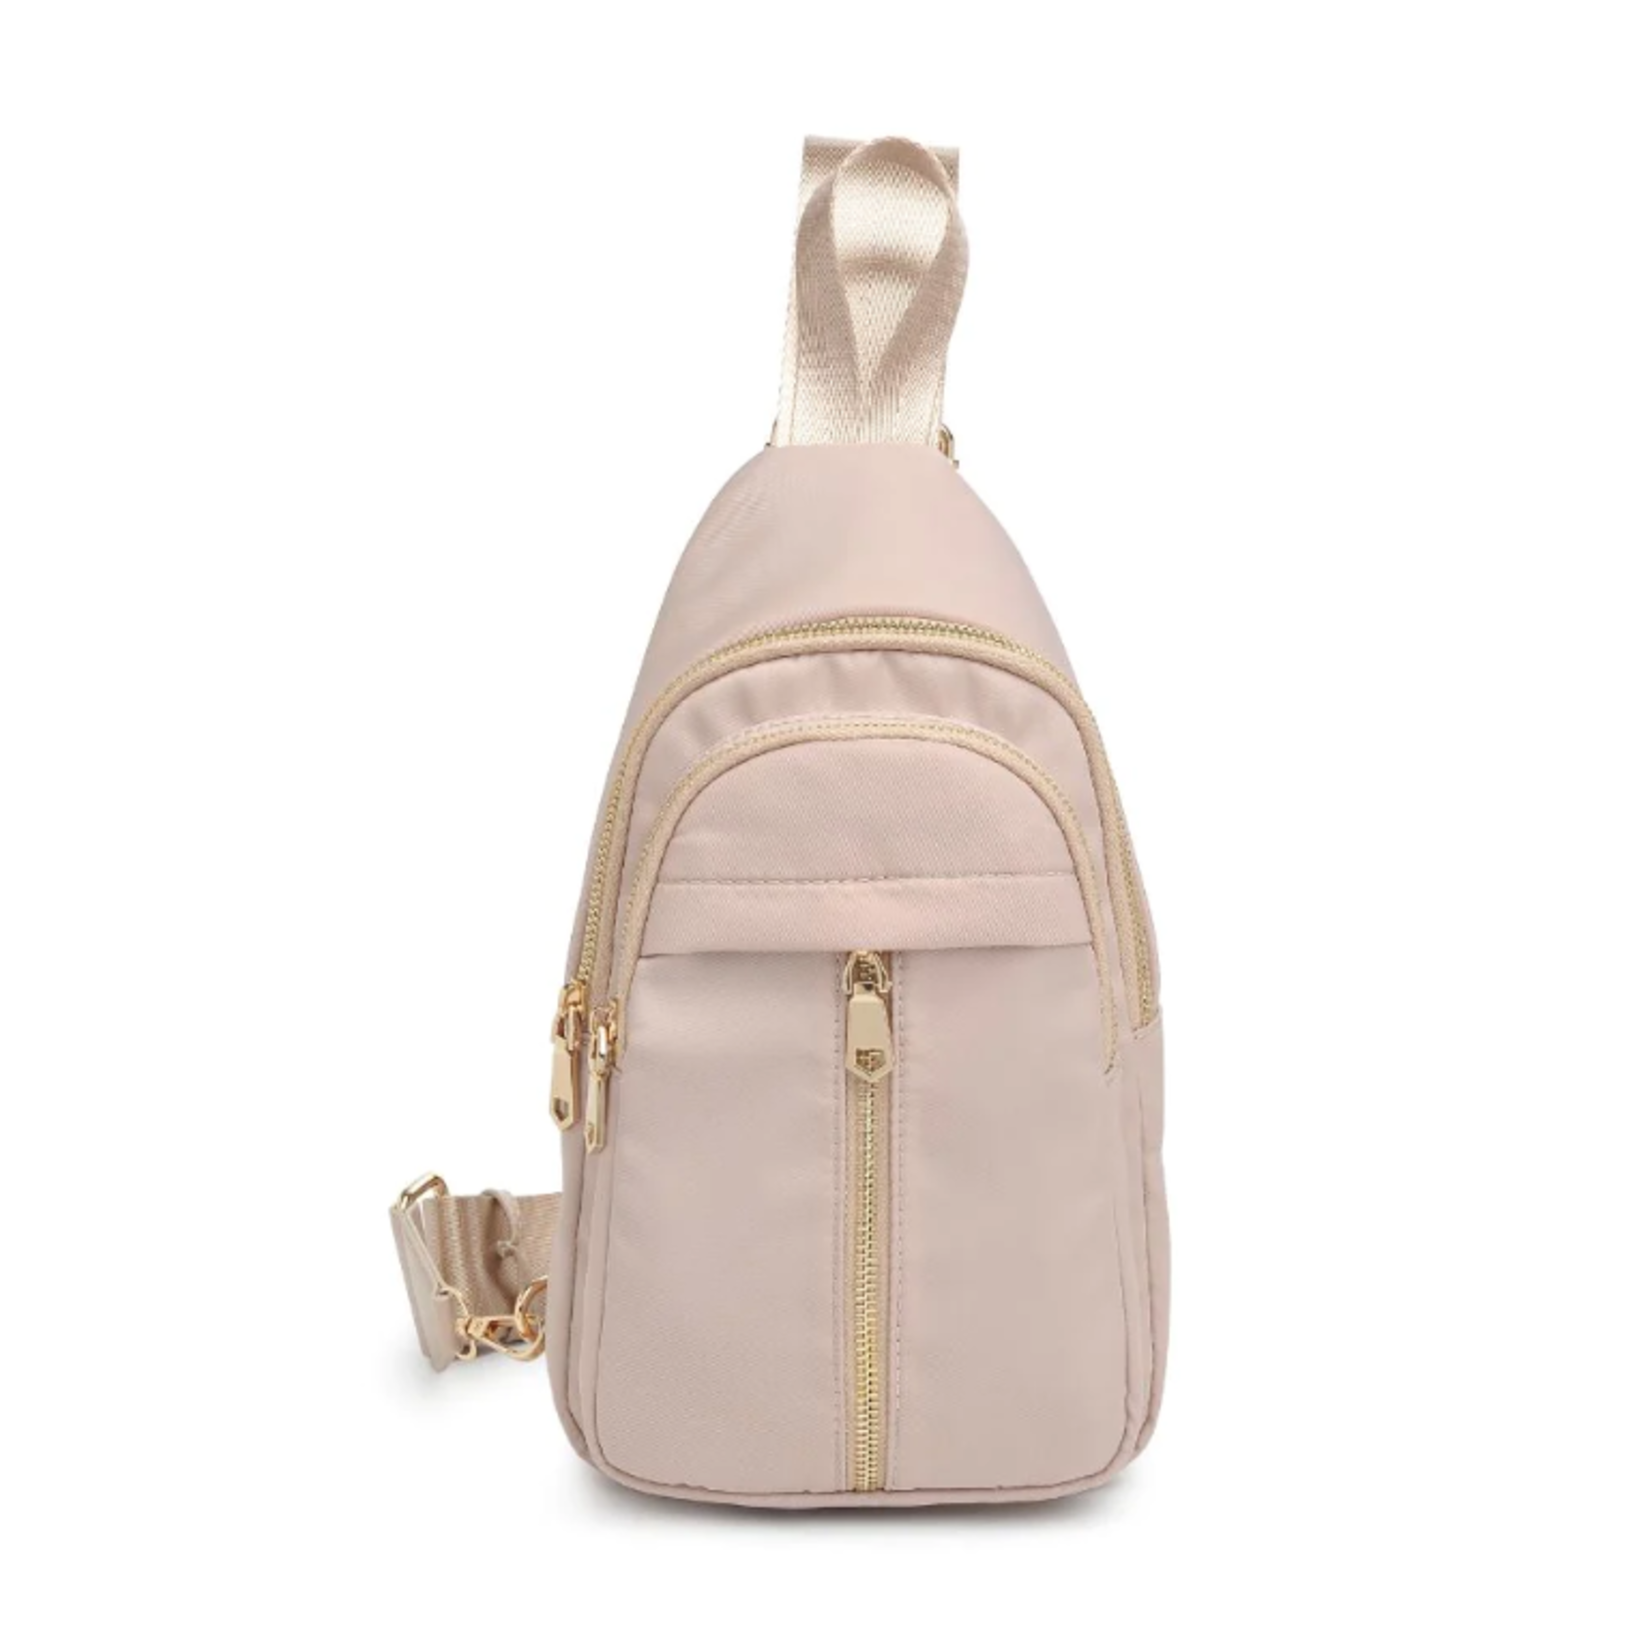 Wagner Sling Backpack - The Beach Nut